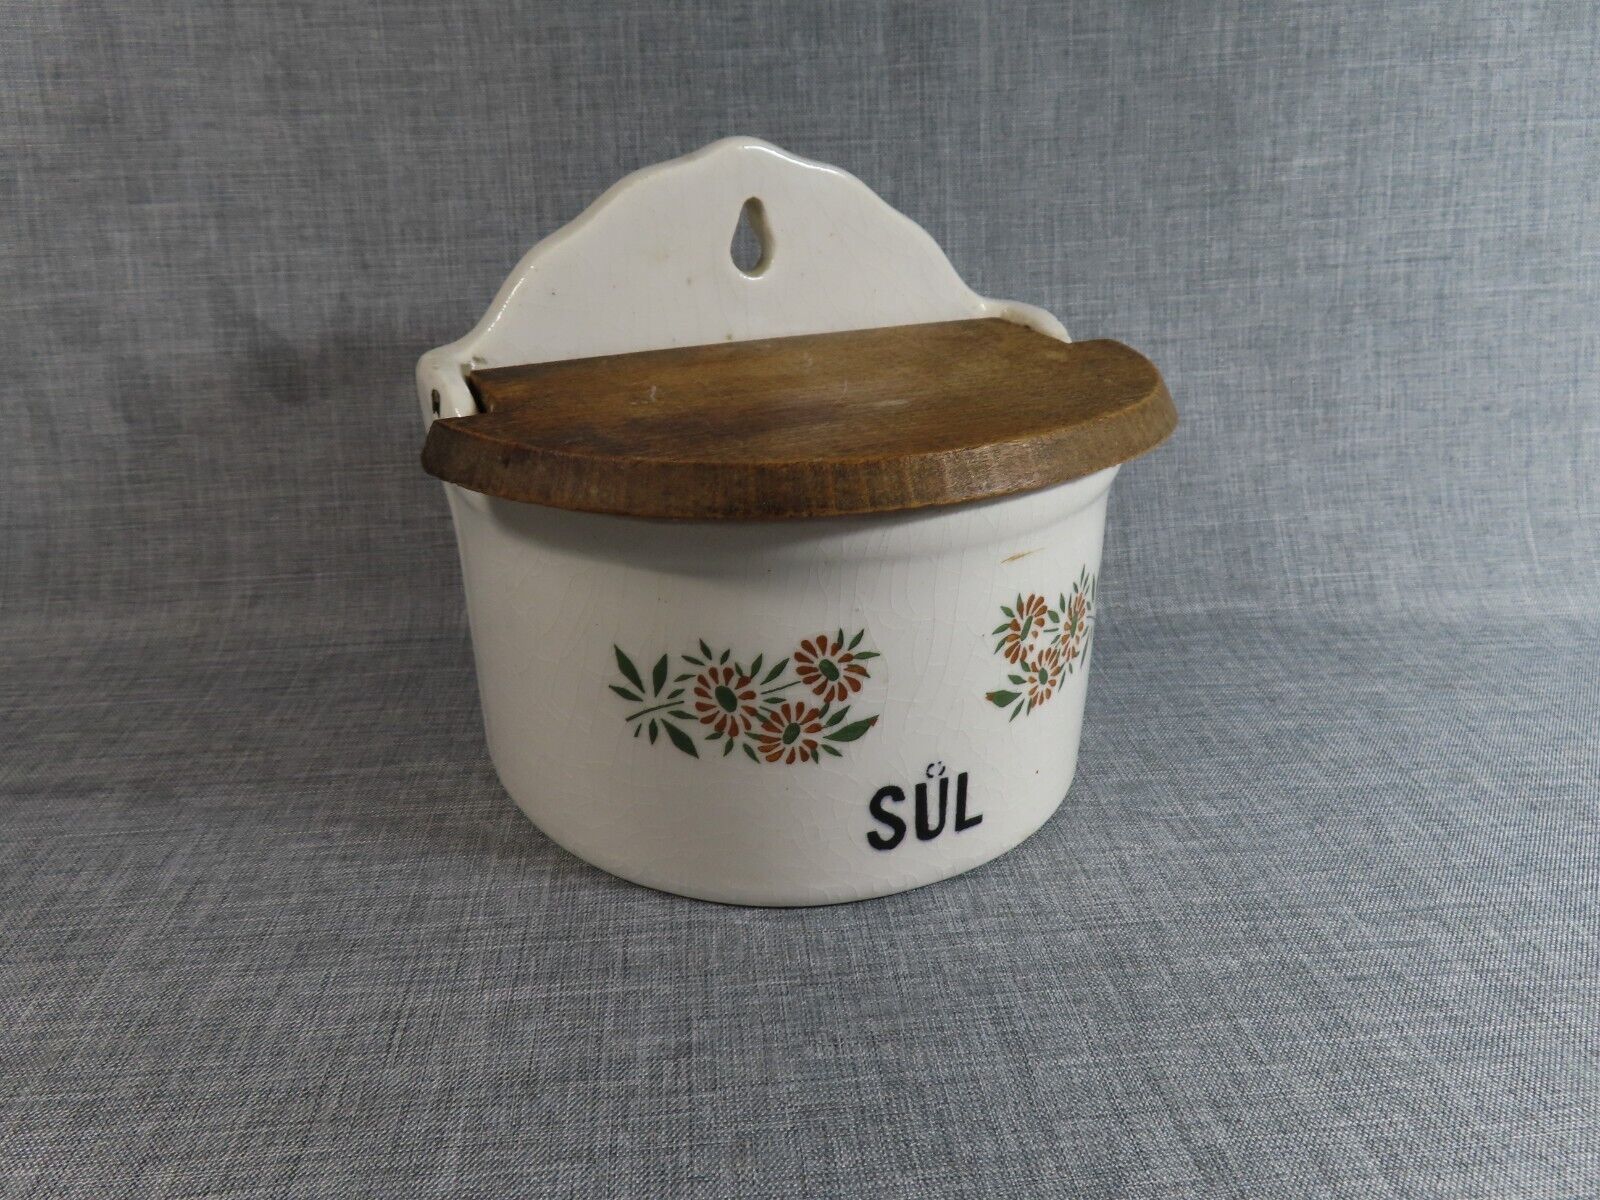 Vintage Ceramic Wall Salt Box with Wood Lid - made in Czechoslovakia. 